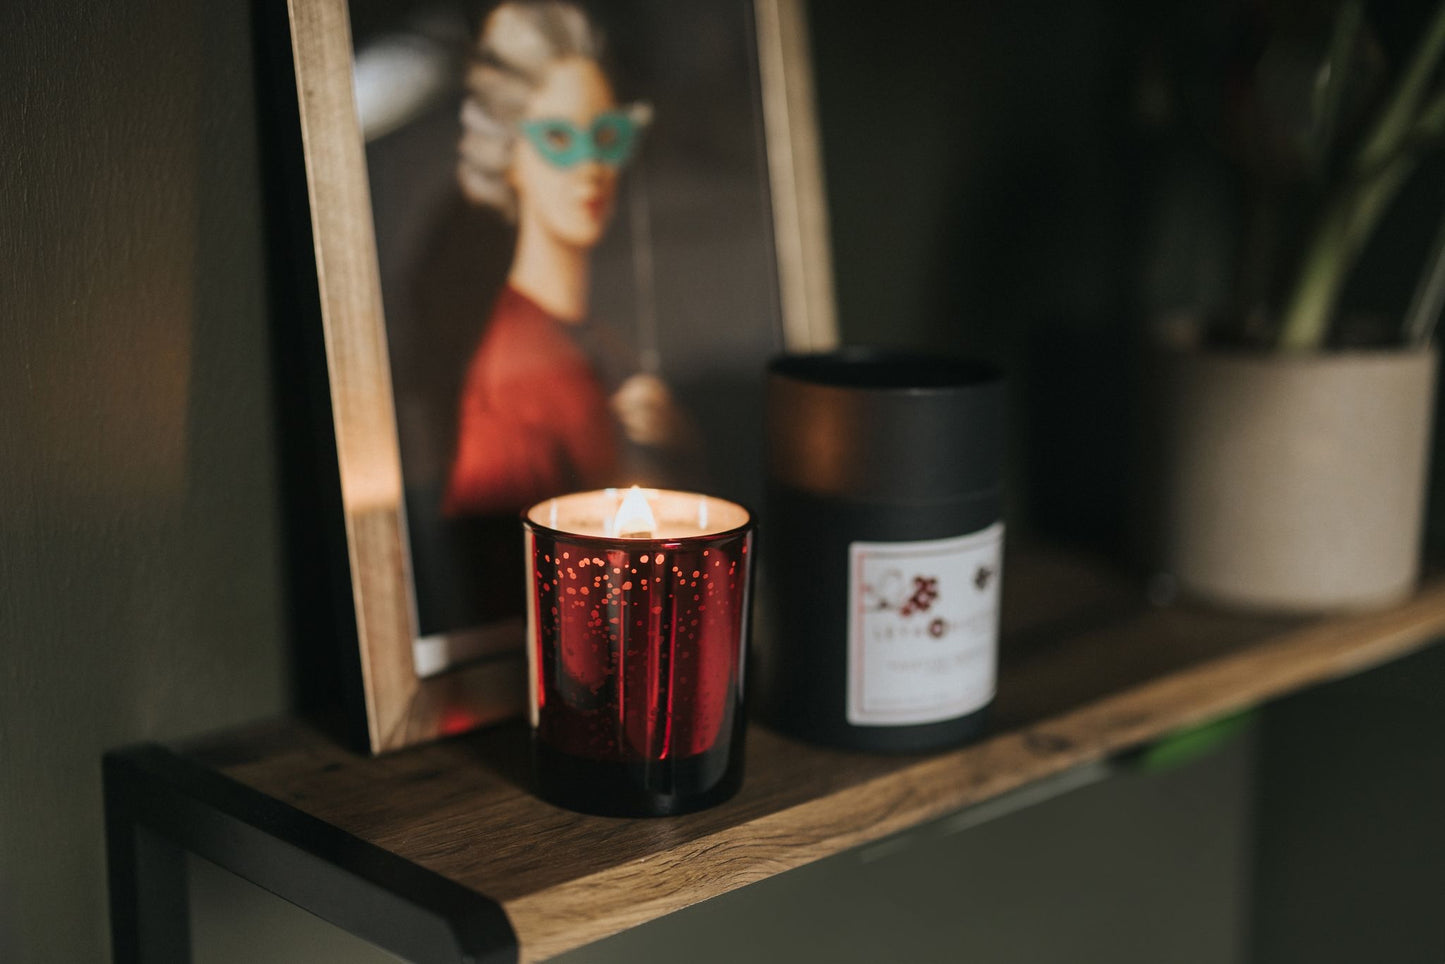 Yuletide Berries - Special Edition Candle